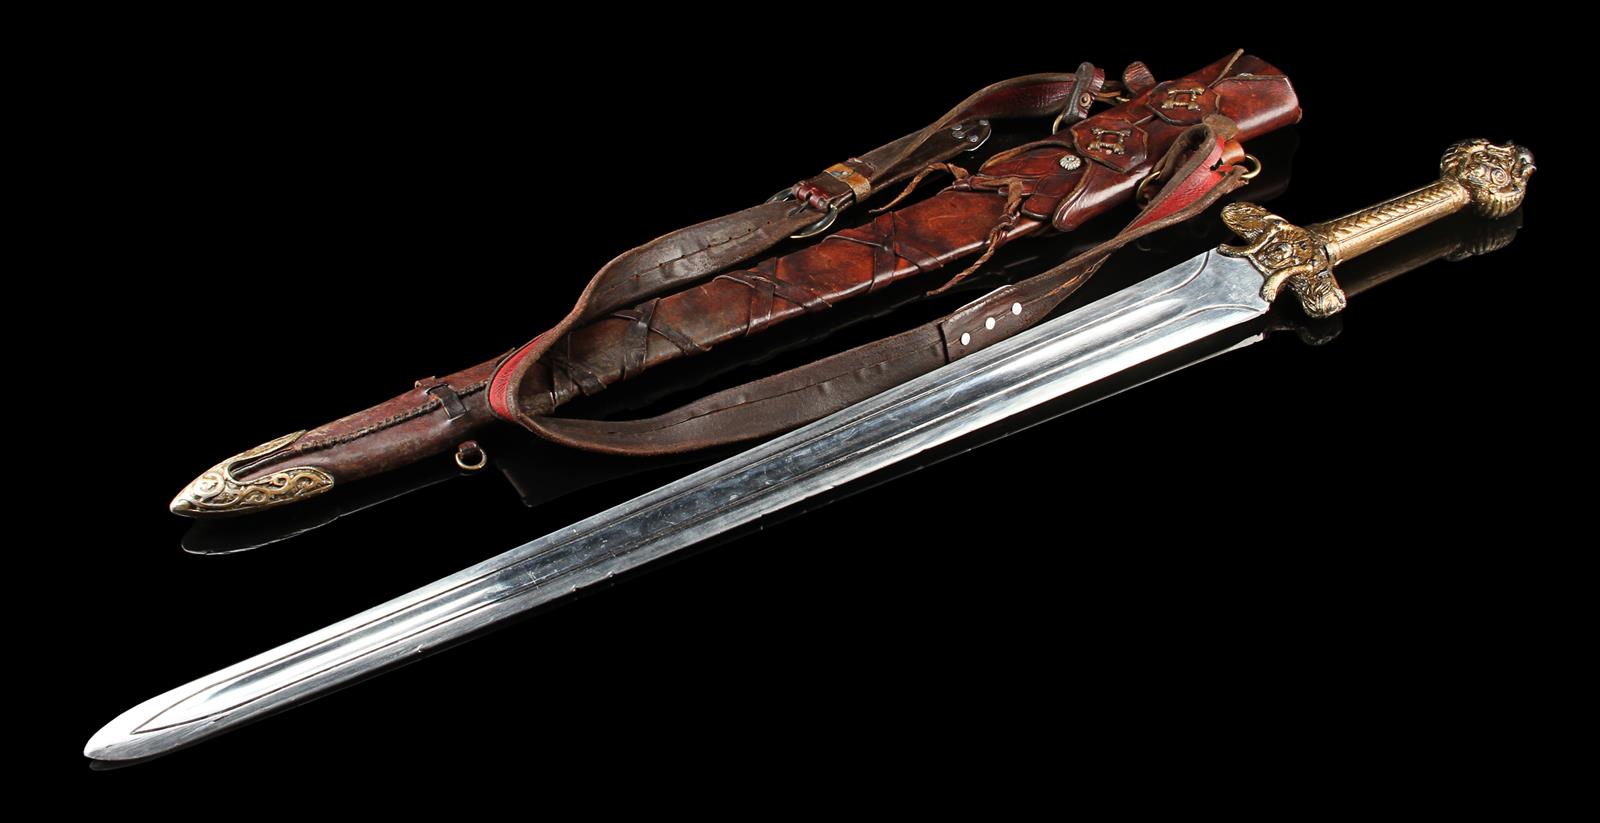 KING ARTHUR (2004) - Hero Excalibur Sword and Scabbard The fabled sword Excalibur from Antoine - Image 11 of 13